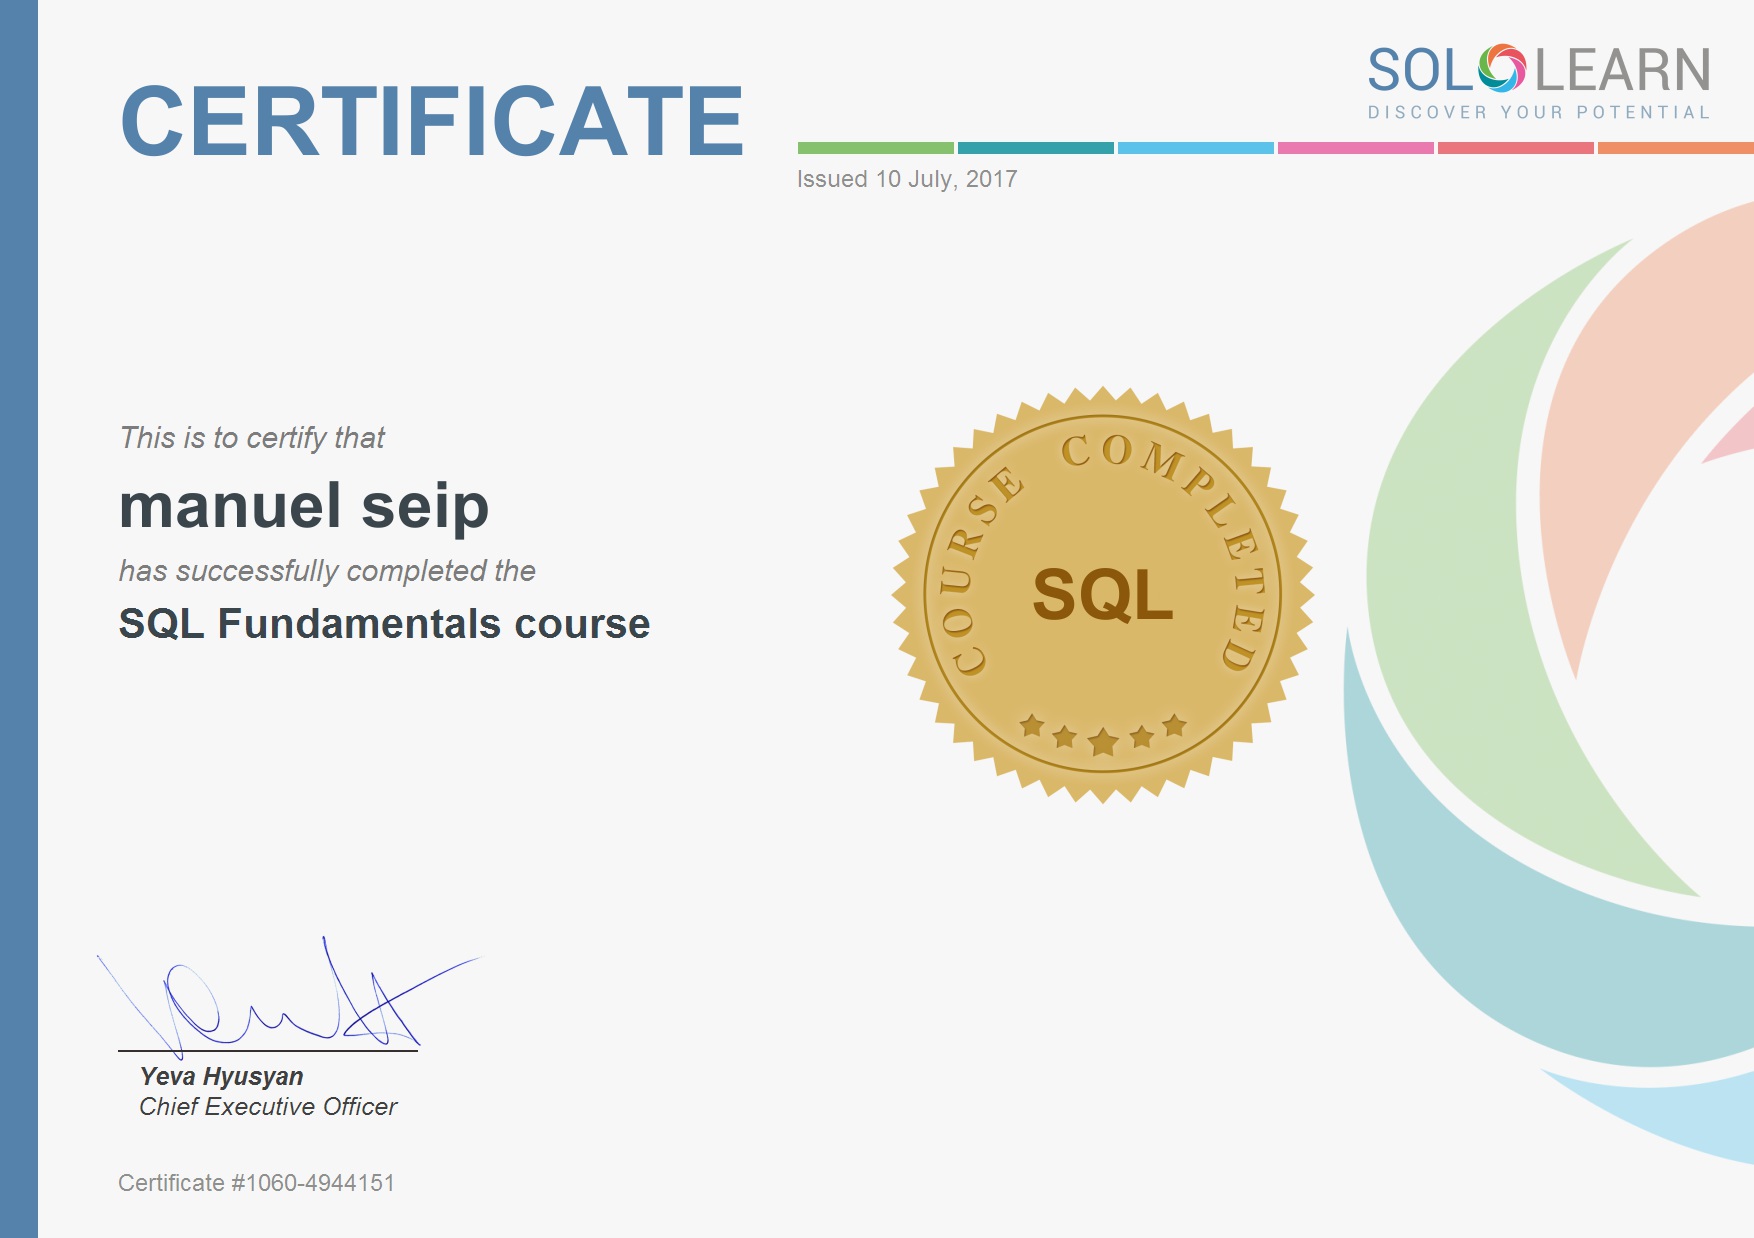 SQL Fundamentals Course Certificate from SoloLearn